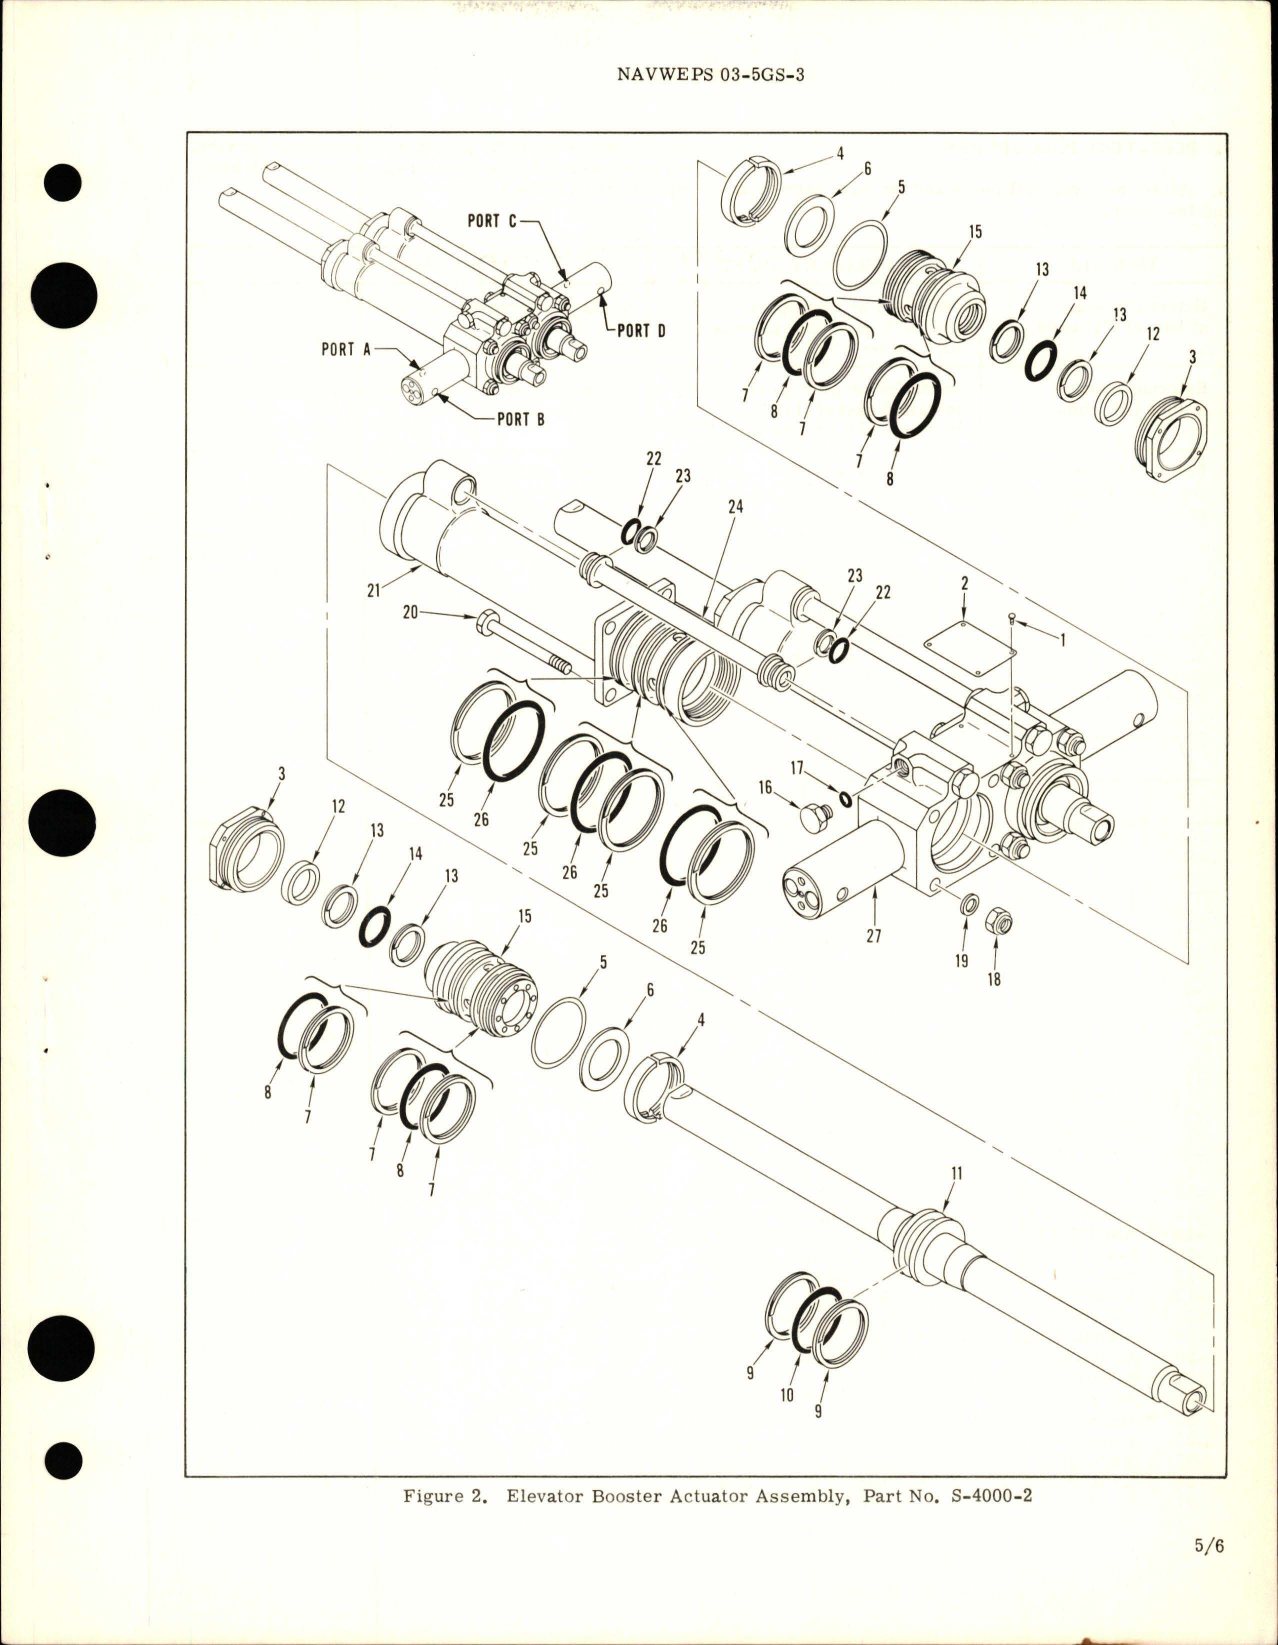 Sample page 5 from AirCorps Library document: Overhaul Instructions with Parts Breakdown for Elevator Booster Actuator Assembly - Part S-4000-2